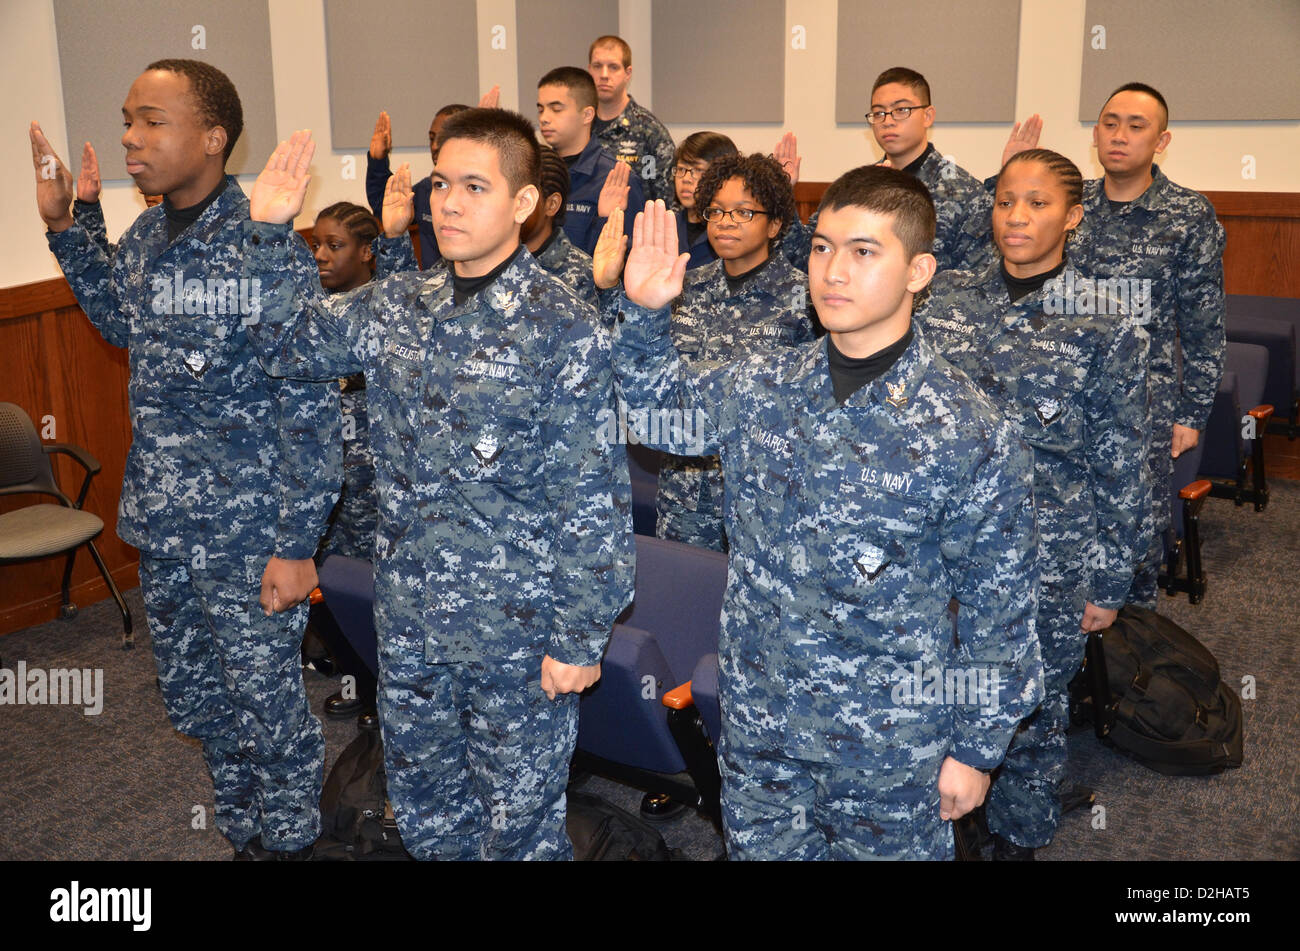 Great Lakes, Illinois, USA. 24th January 2013. Twenty-one US Navy recruits at Recruit Training Command take the Oath of Allegiance to become United States citizens January 22, 2013 in Great Lakes, IL. Under a program in acted in 2012 he Citizenship and Immigration Services in partnership with RTC has expedited citizenship for more than 1,650 recruits during boot camp training. Credit:  US Navy Photo / Alamy Live News Stock Photo